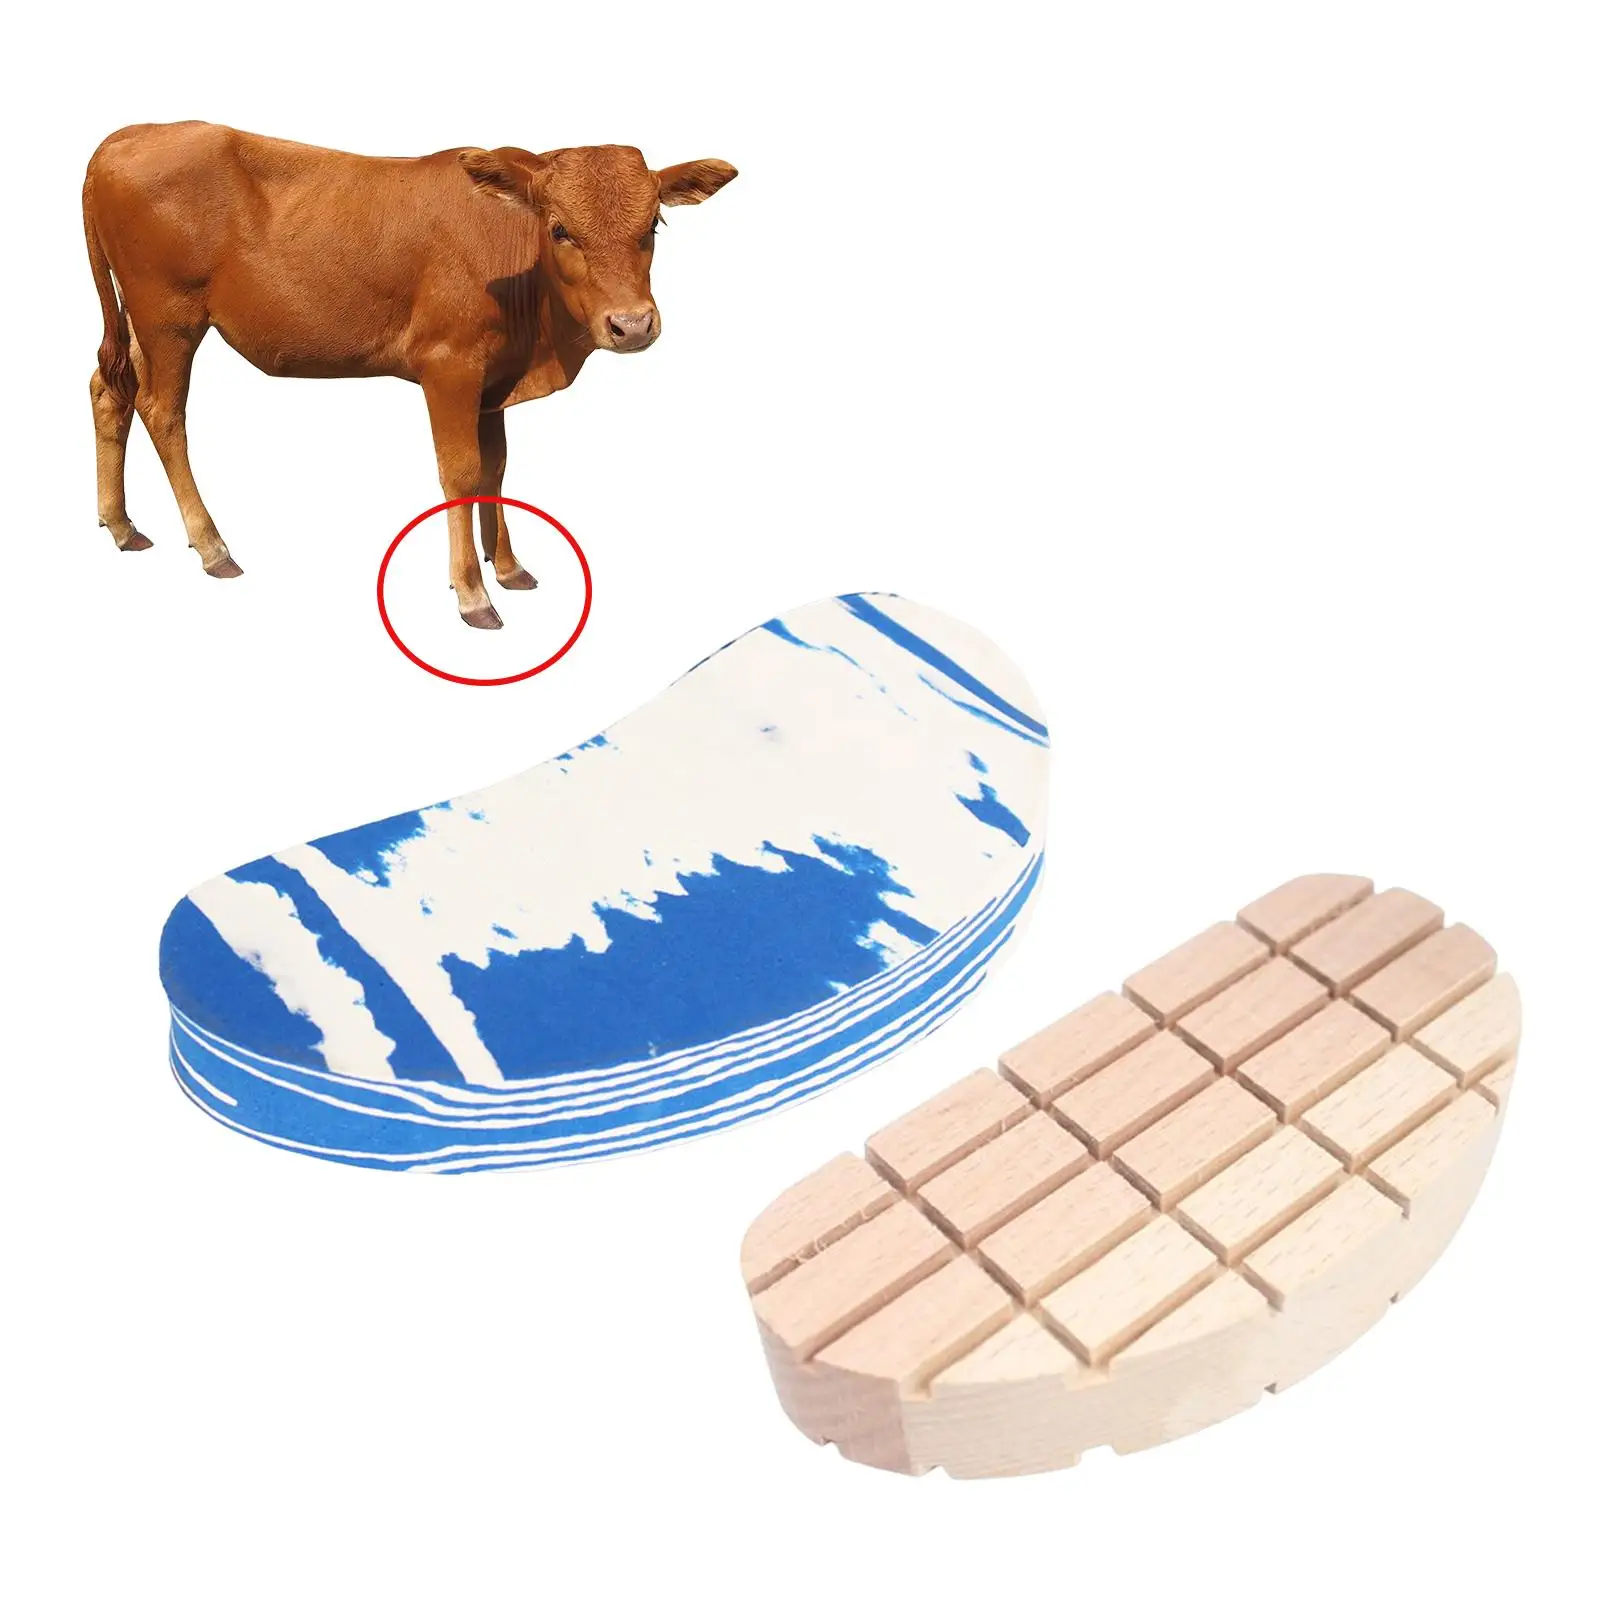 Cow Hoof Pad Repair Tool Riding Rubber Durable Professional Slabs Farms Cow Trimming Cushion for Cattles Cow Pasture Pigs Horses